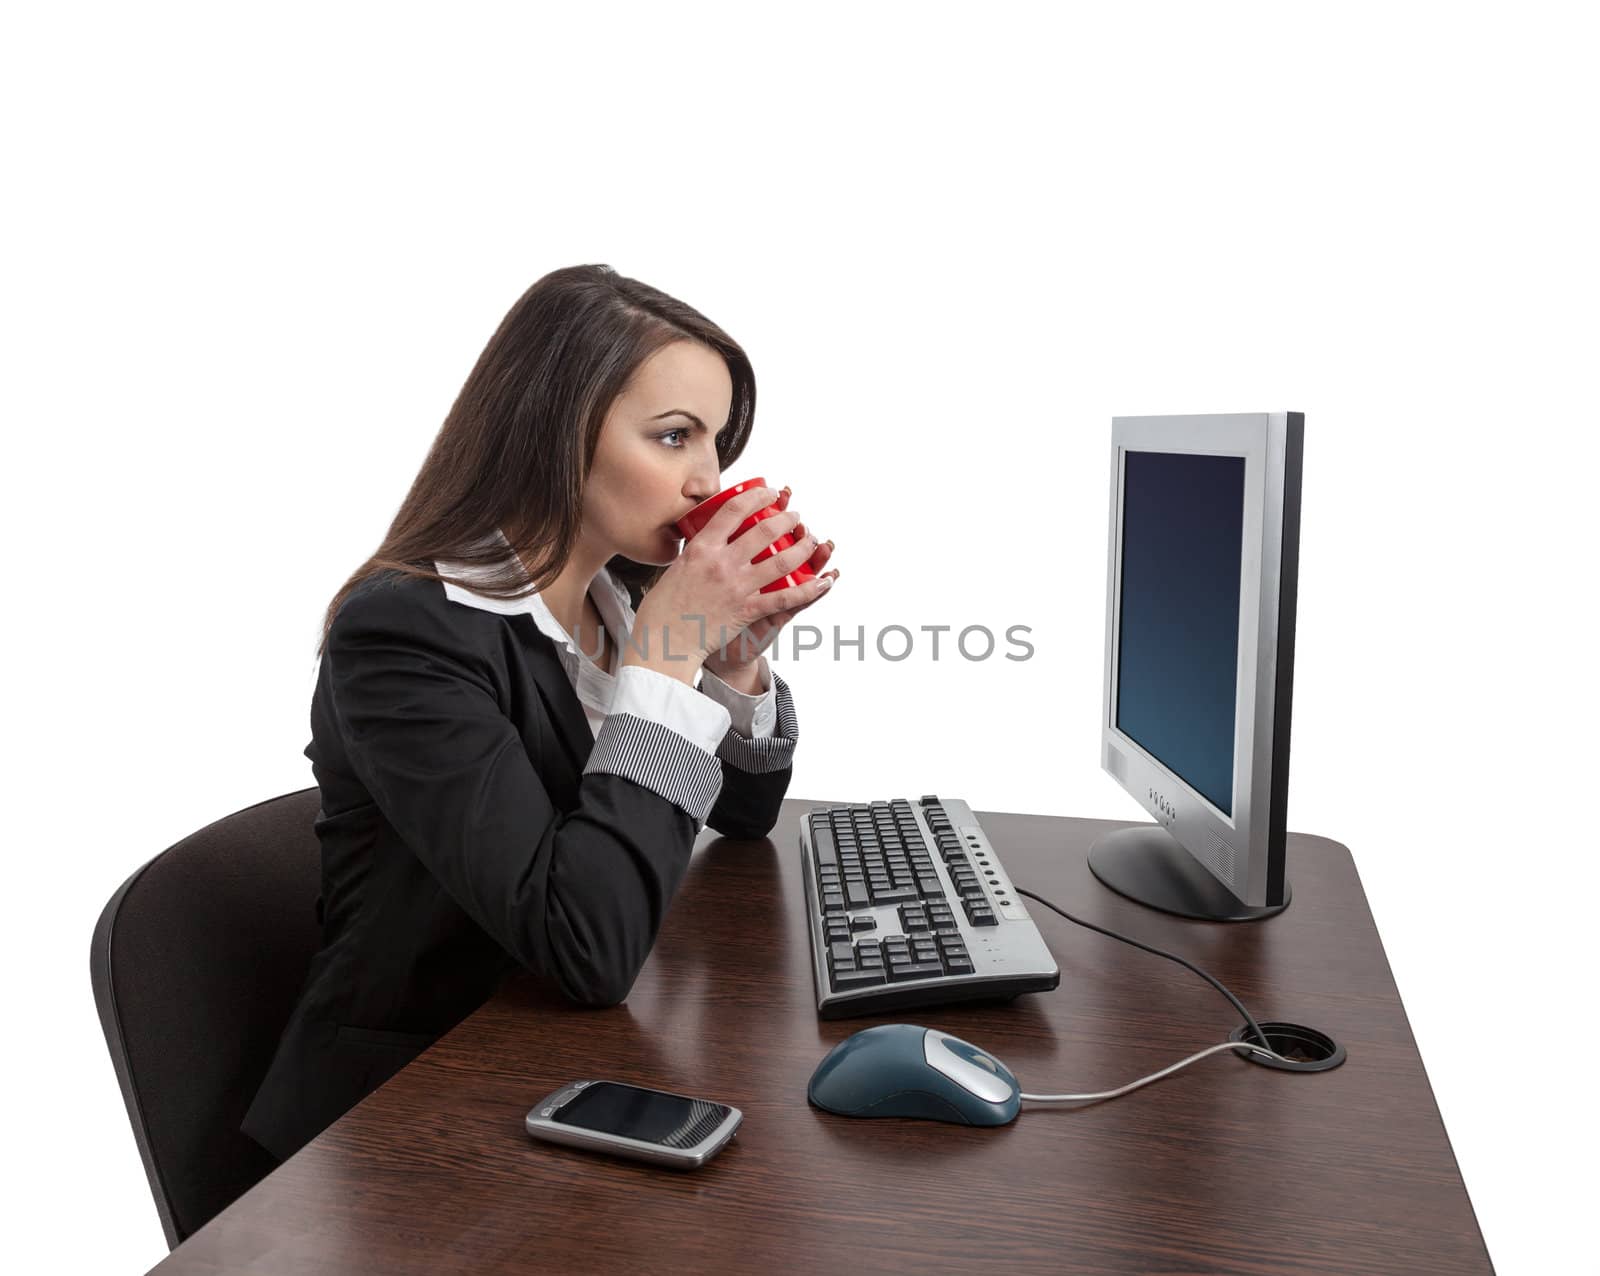 Young businesswoman drinking a cup of coffee at her desk in the office, isolated against a white background.